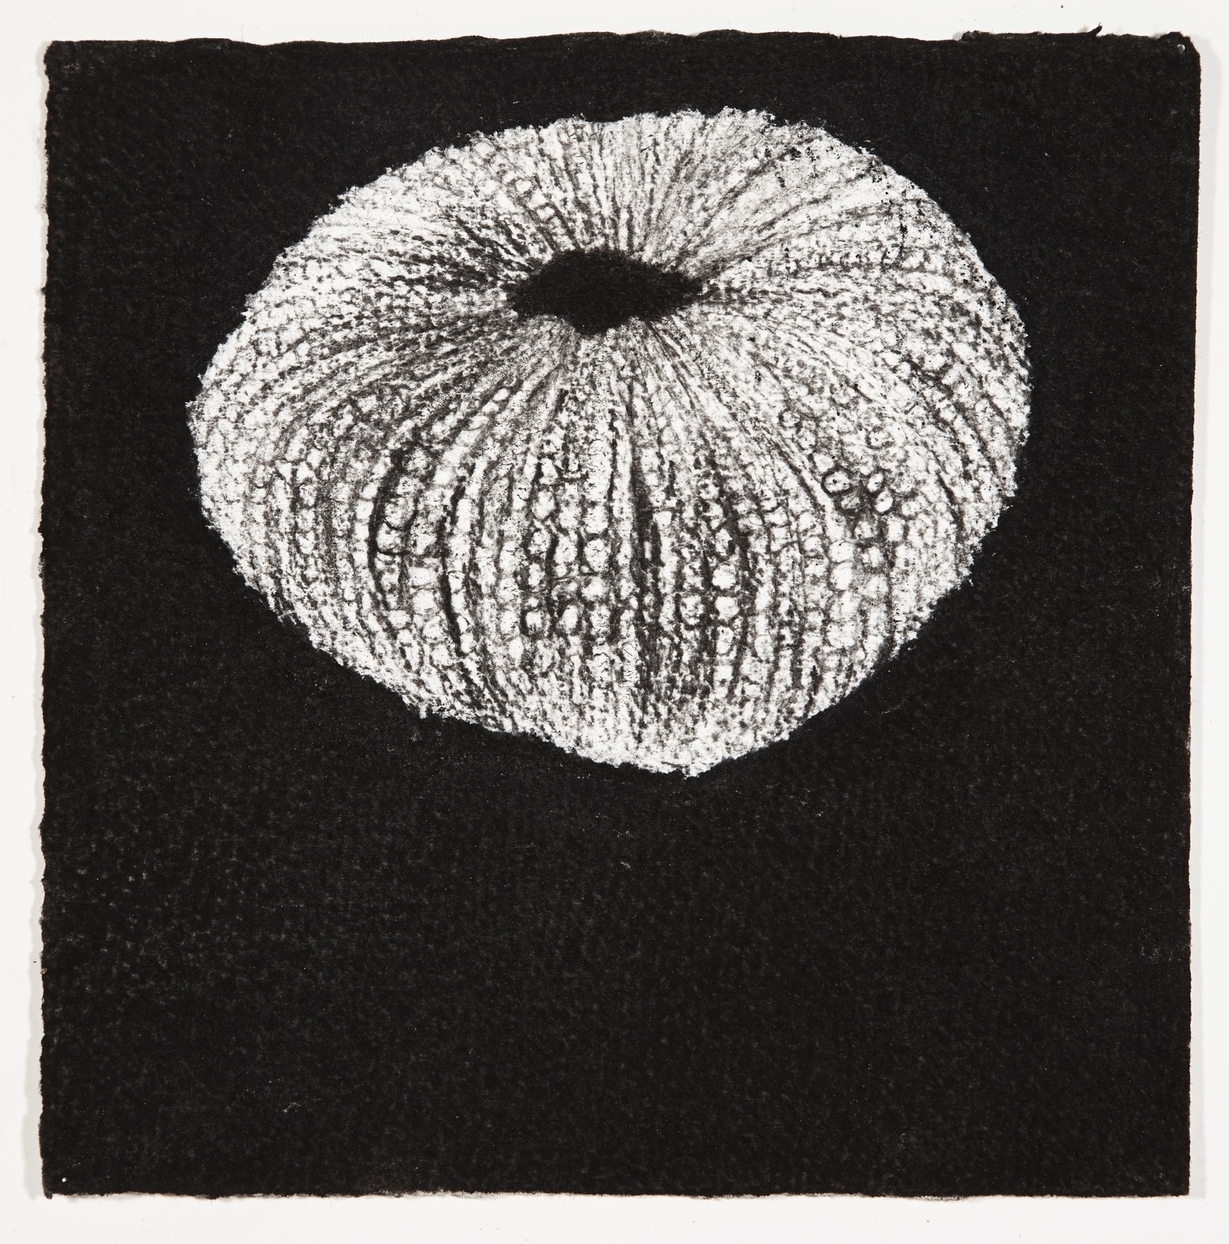  Urchin, 2014, charcoal on paper, 18x18cm 